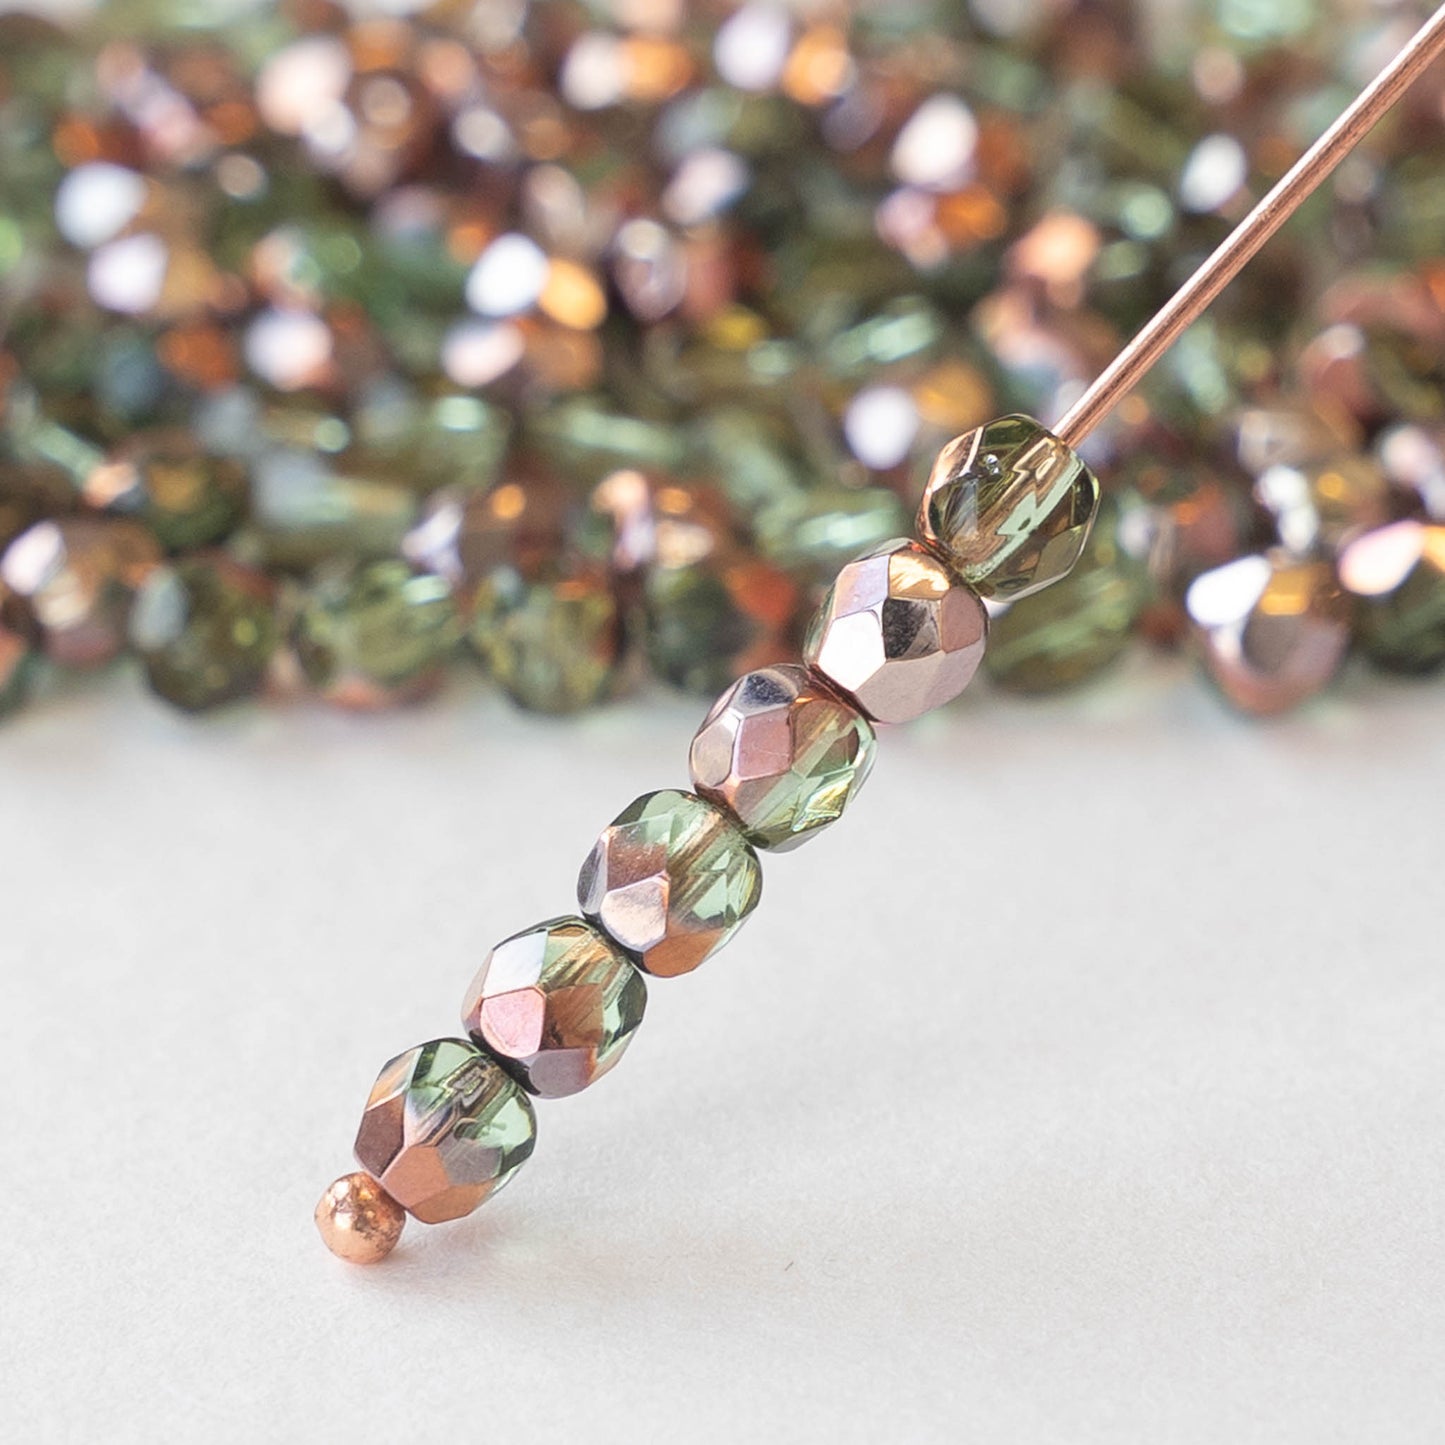 4mm Faceted Round Beads - Peridot Green with Copper - 100 beads